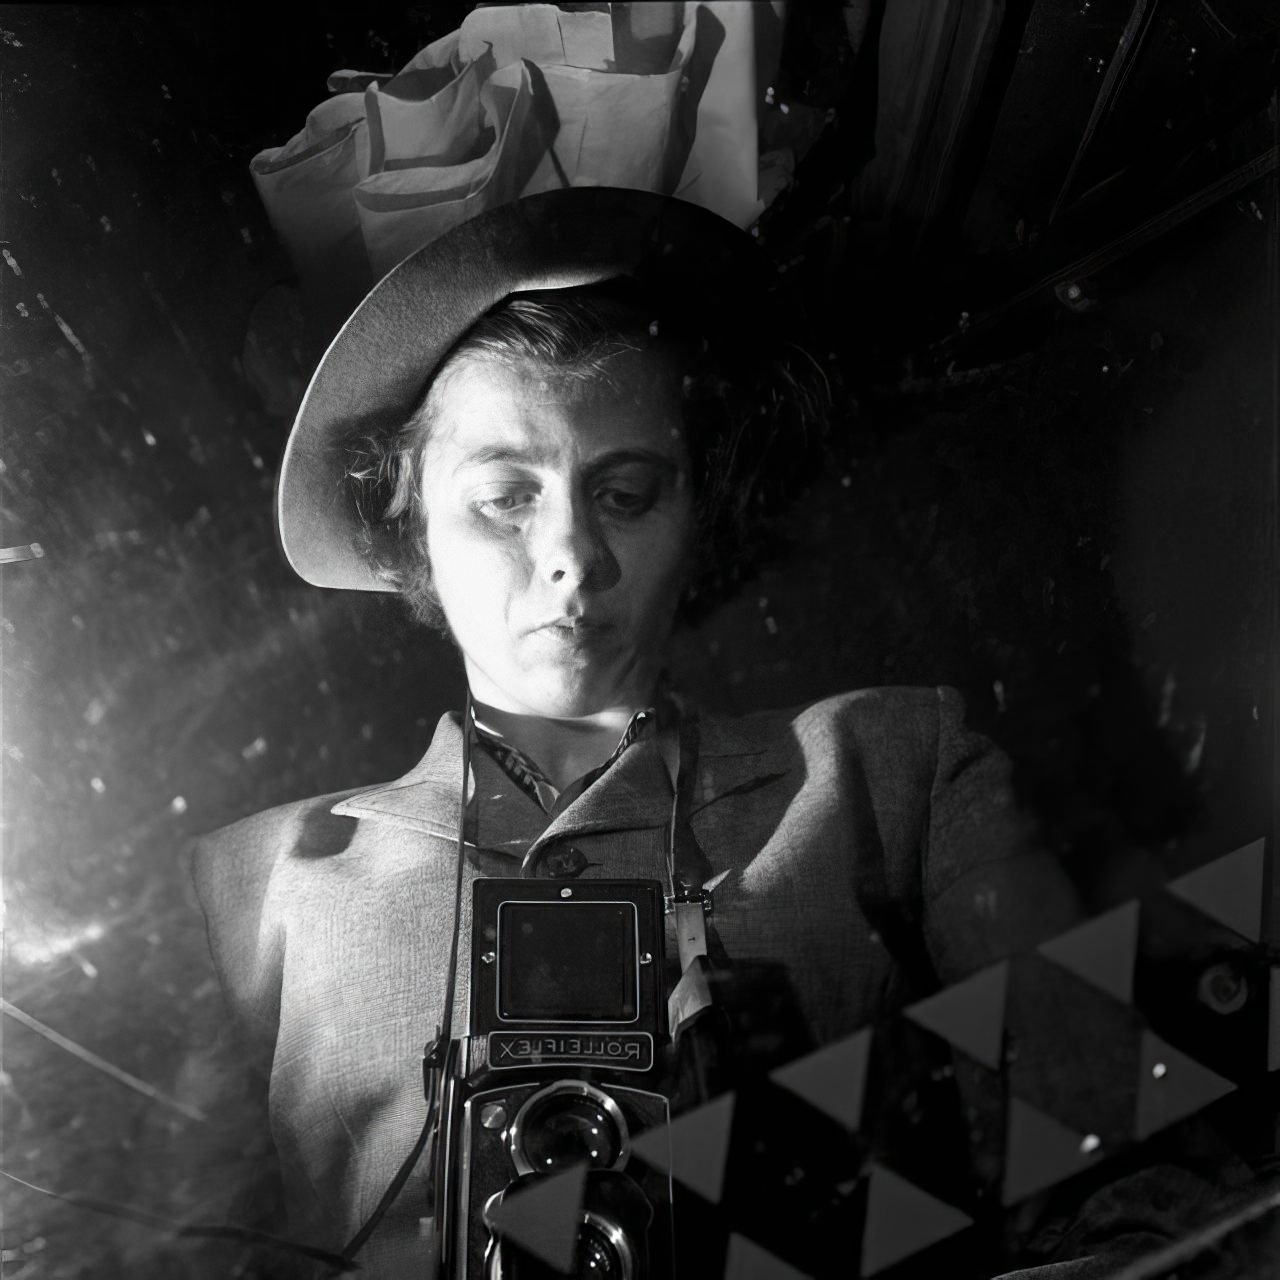 Stunning and Creative Self-Portraits by Vivian Maier that Redefine the Selfie